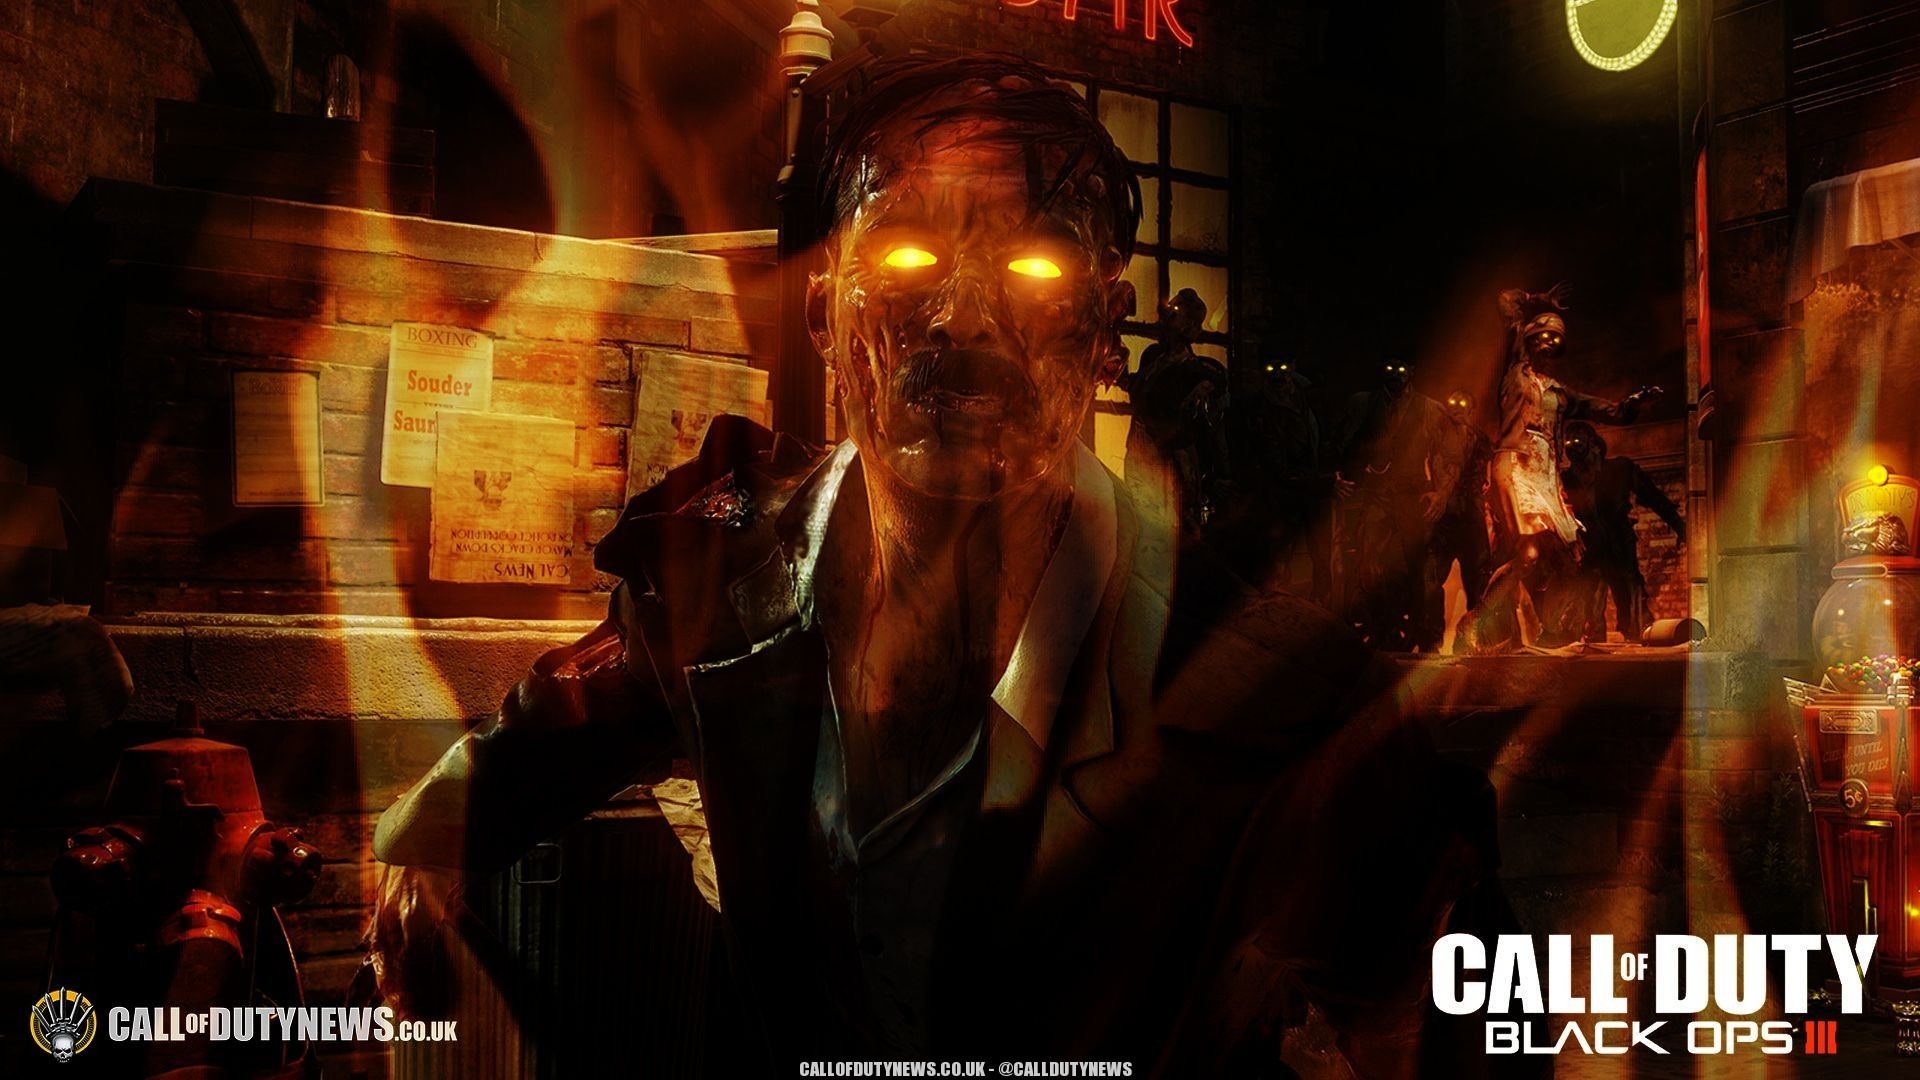 1920x1080  Call of Duty - Black ops 3 - Zombie Wallpaper image - Armies of .